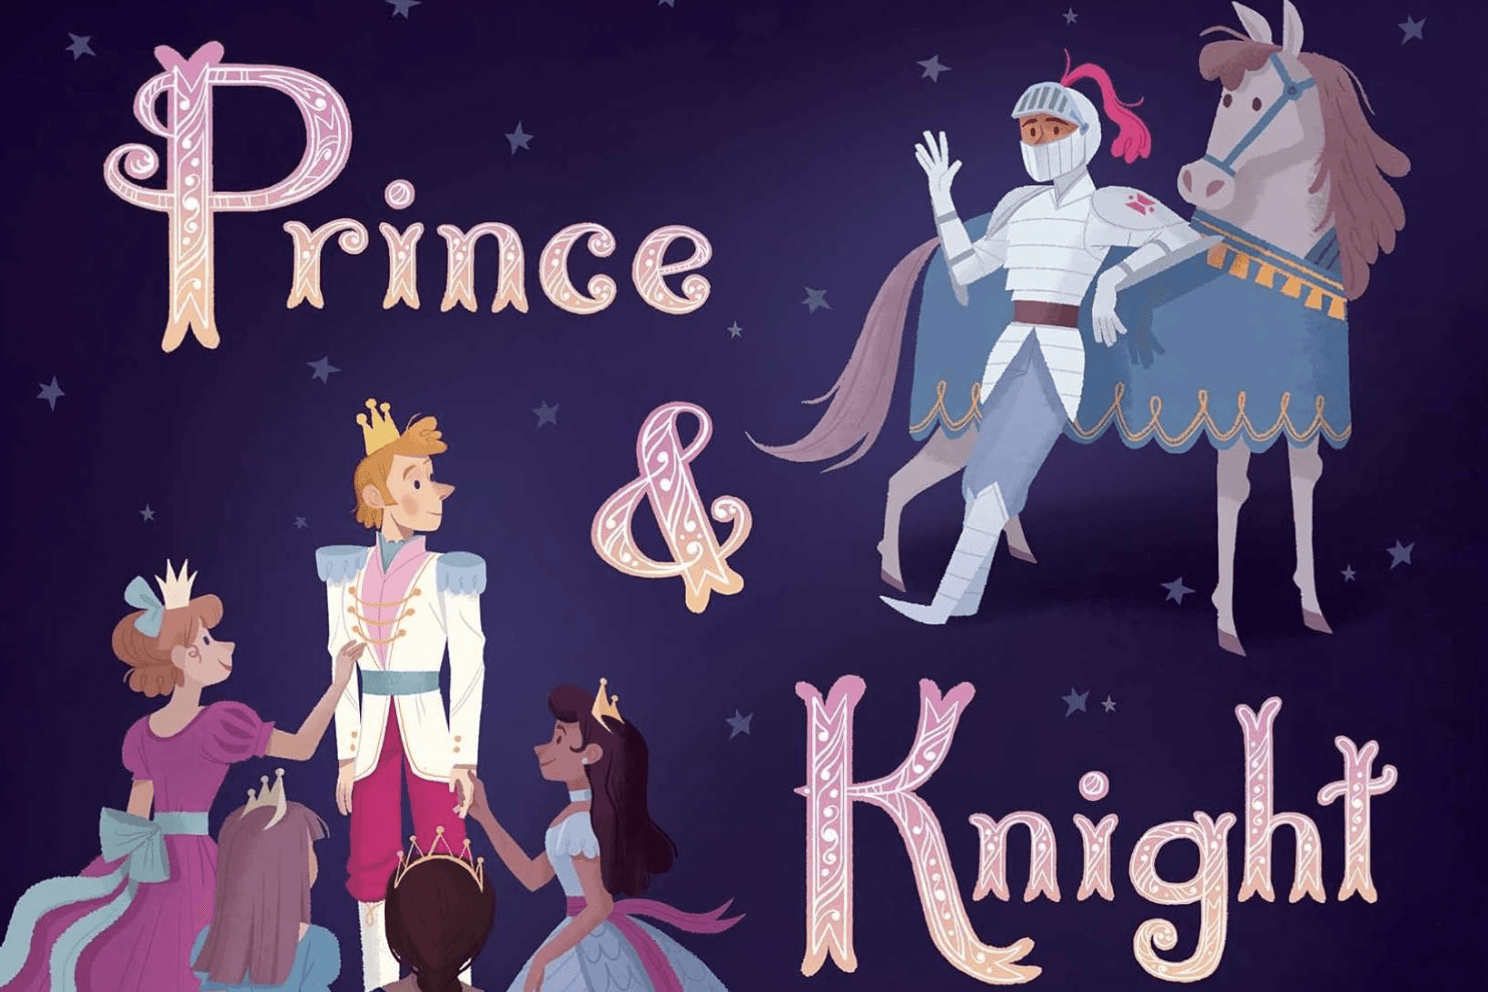 Prince and Knight.